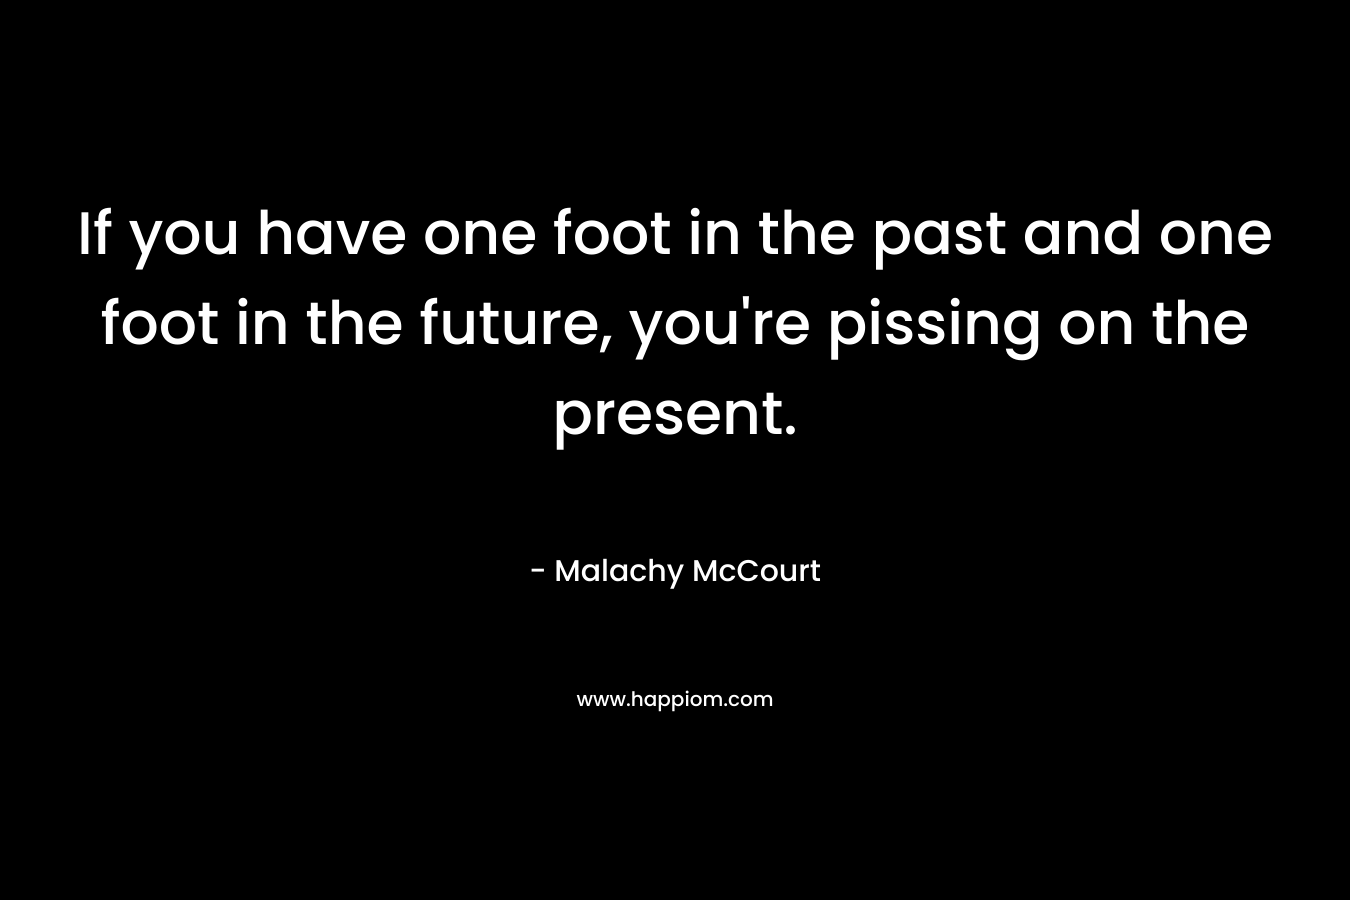 If you have one foot in the past and one foot in the future, you’re pissing on the present. – Malachy McCourt